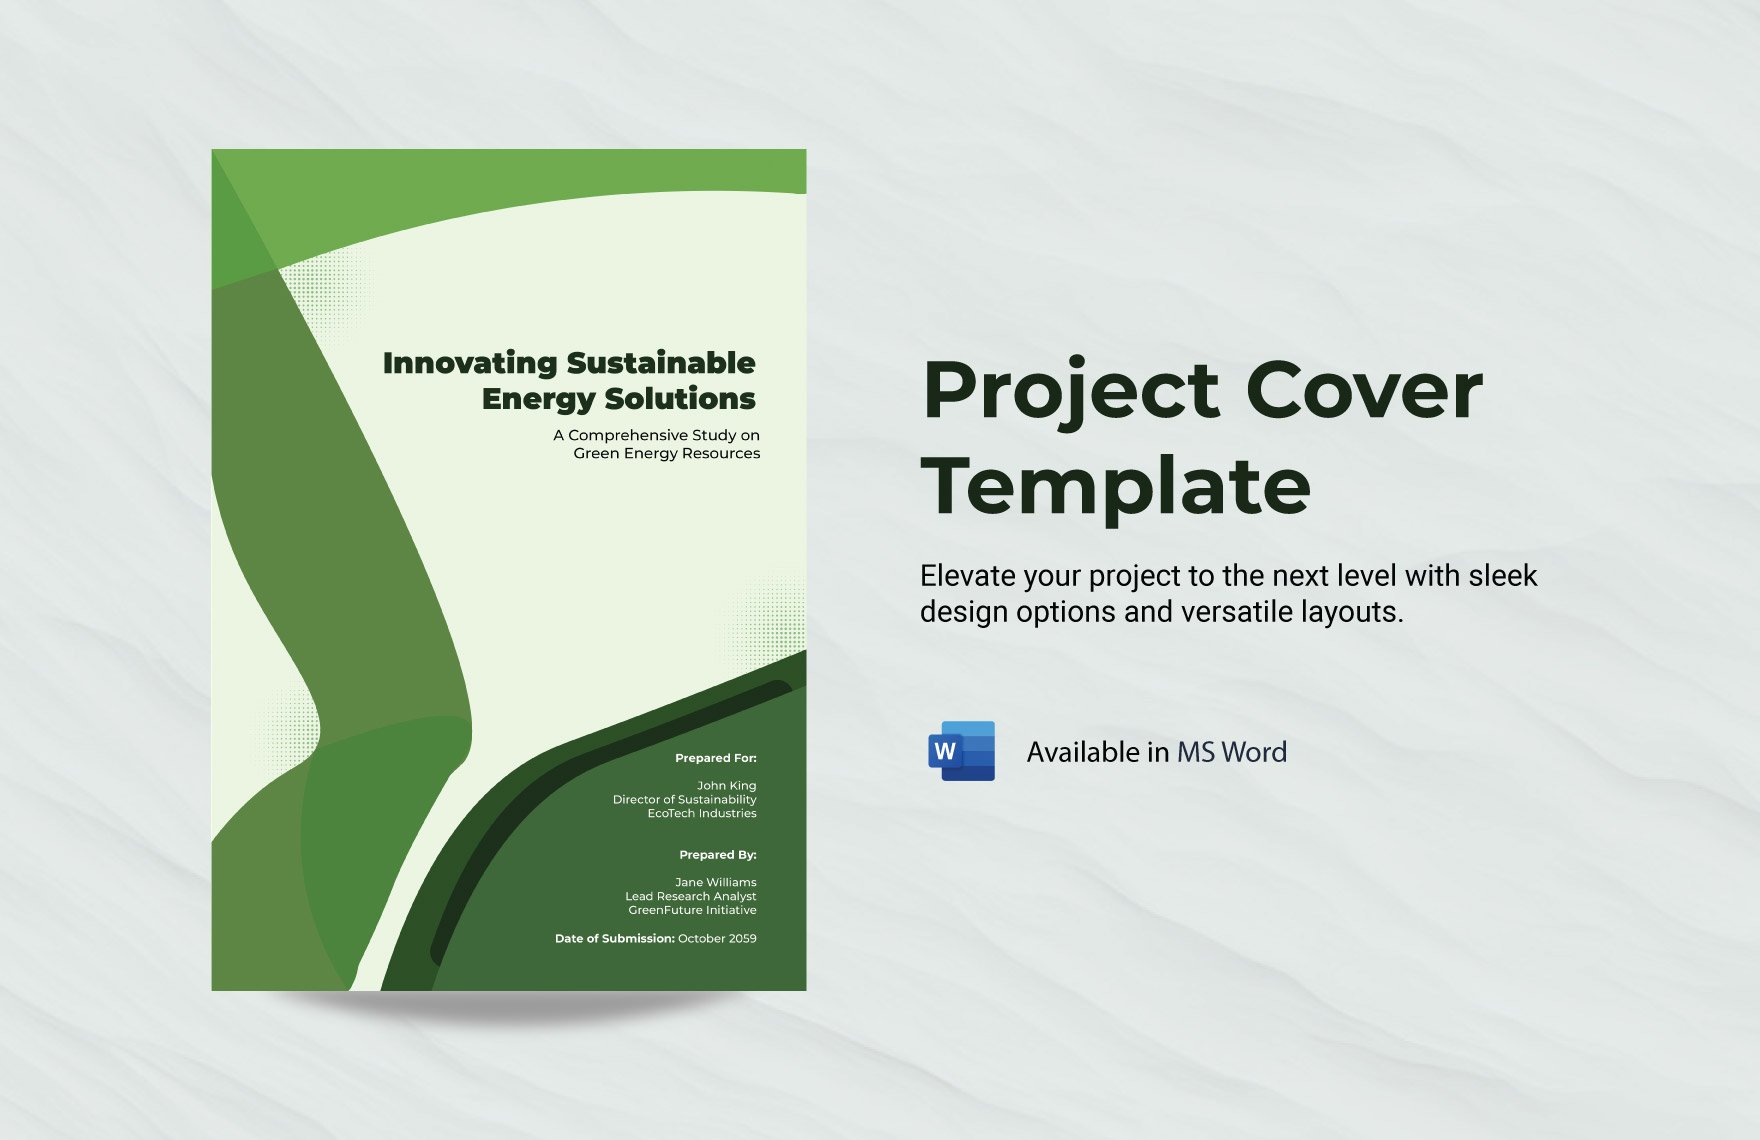 Project Cover Template